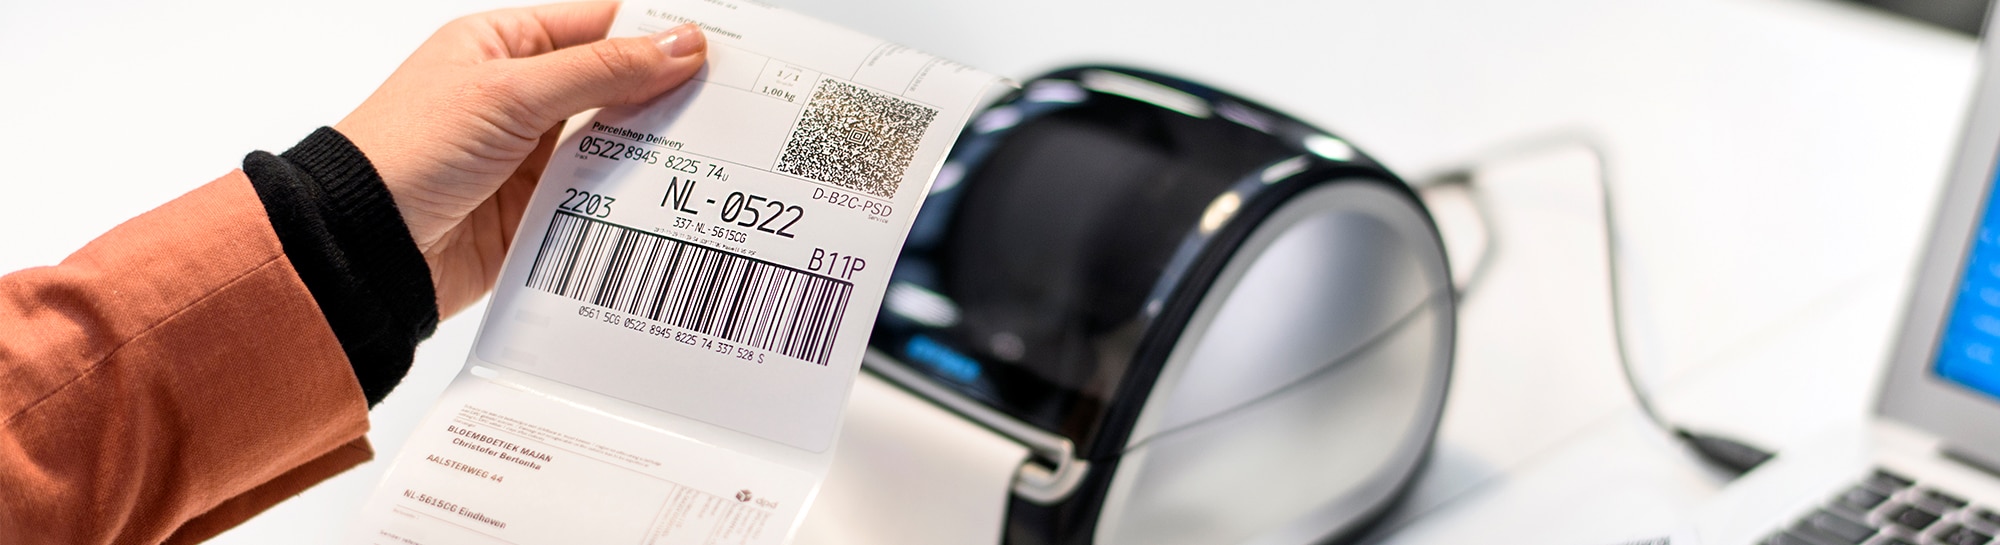 Label printers for shipping labels: everything you need to know